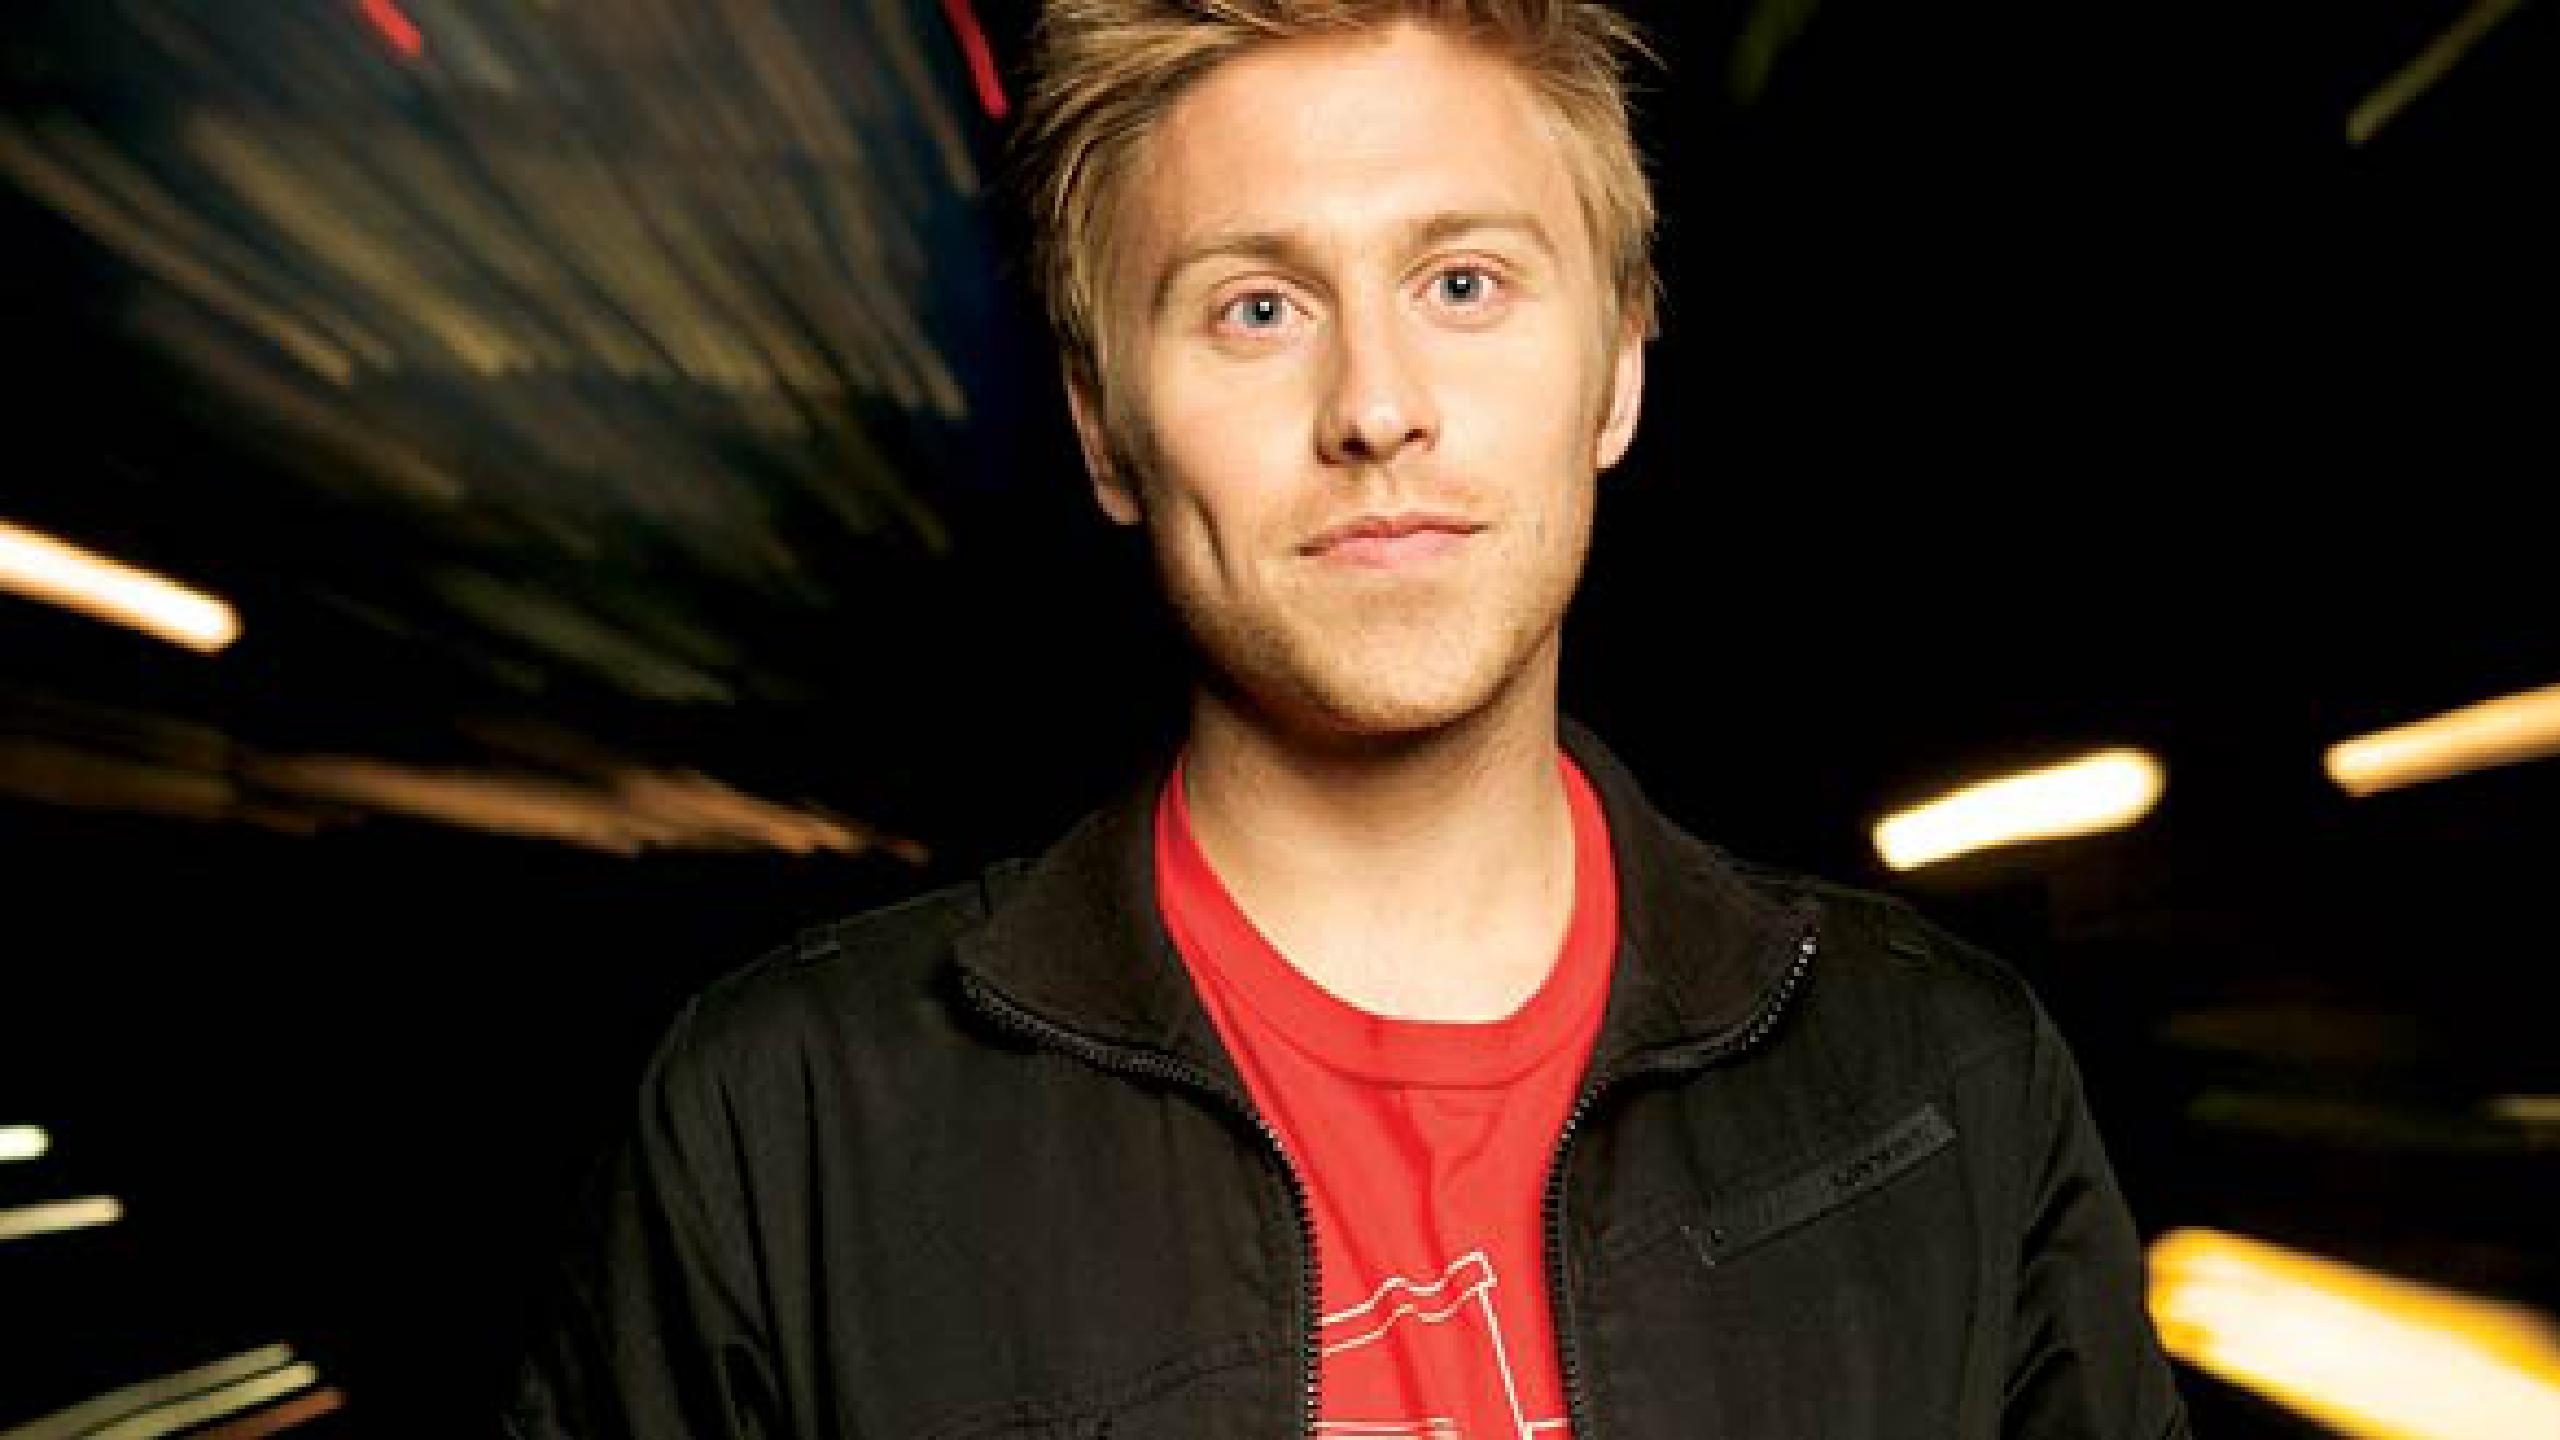 russell howard tour tickets